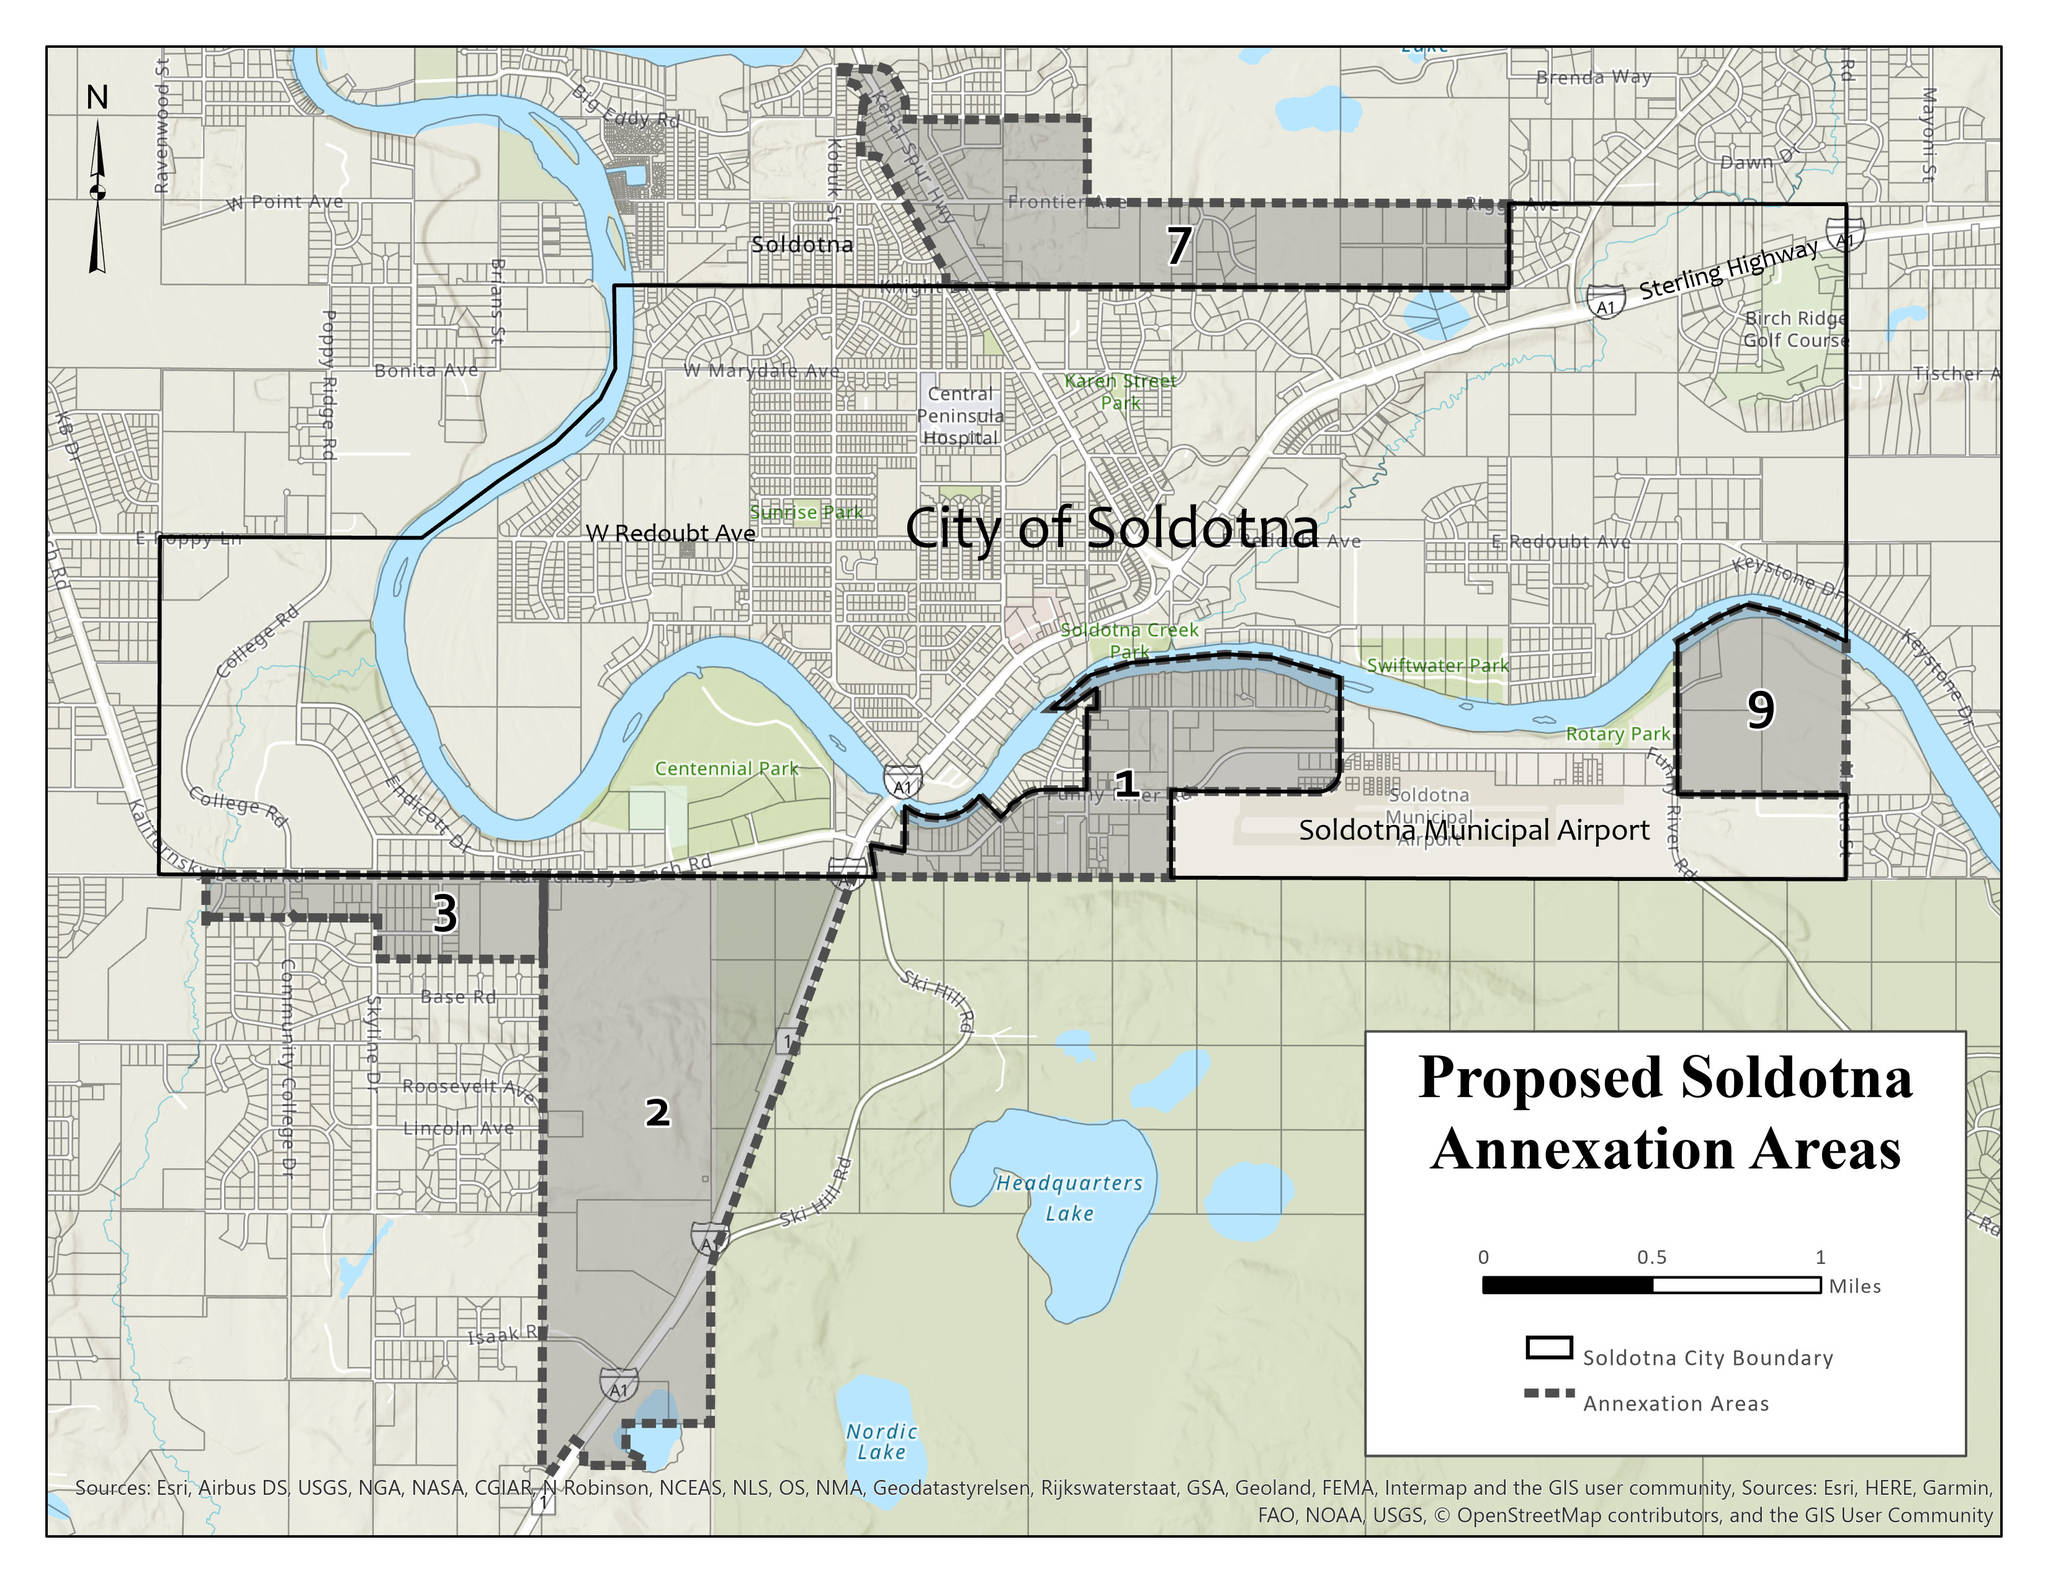 A map of the areas proposed for annexation by the City of Soldotna. (Courtesy Alaska Department of Commerce)